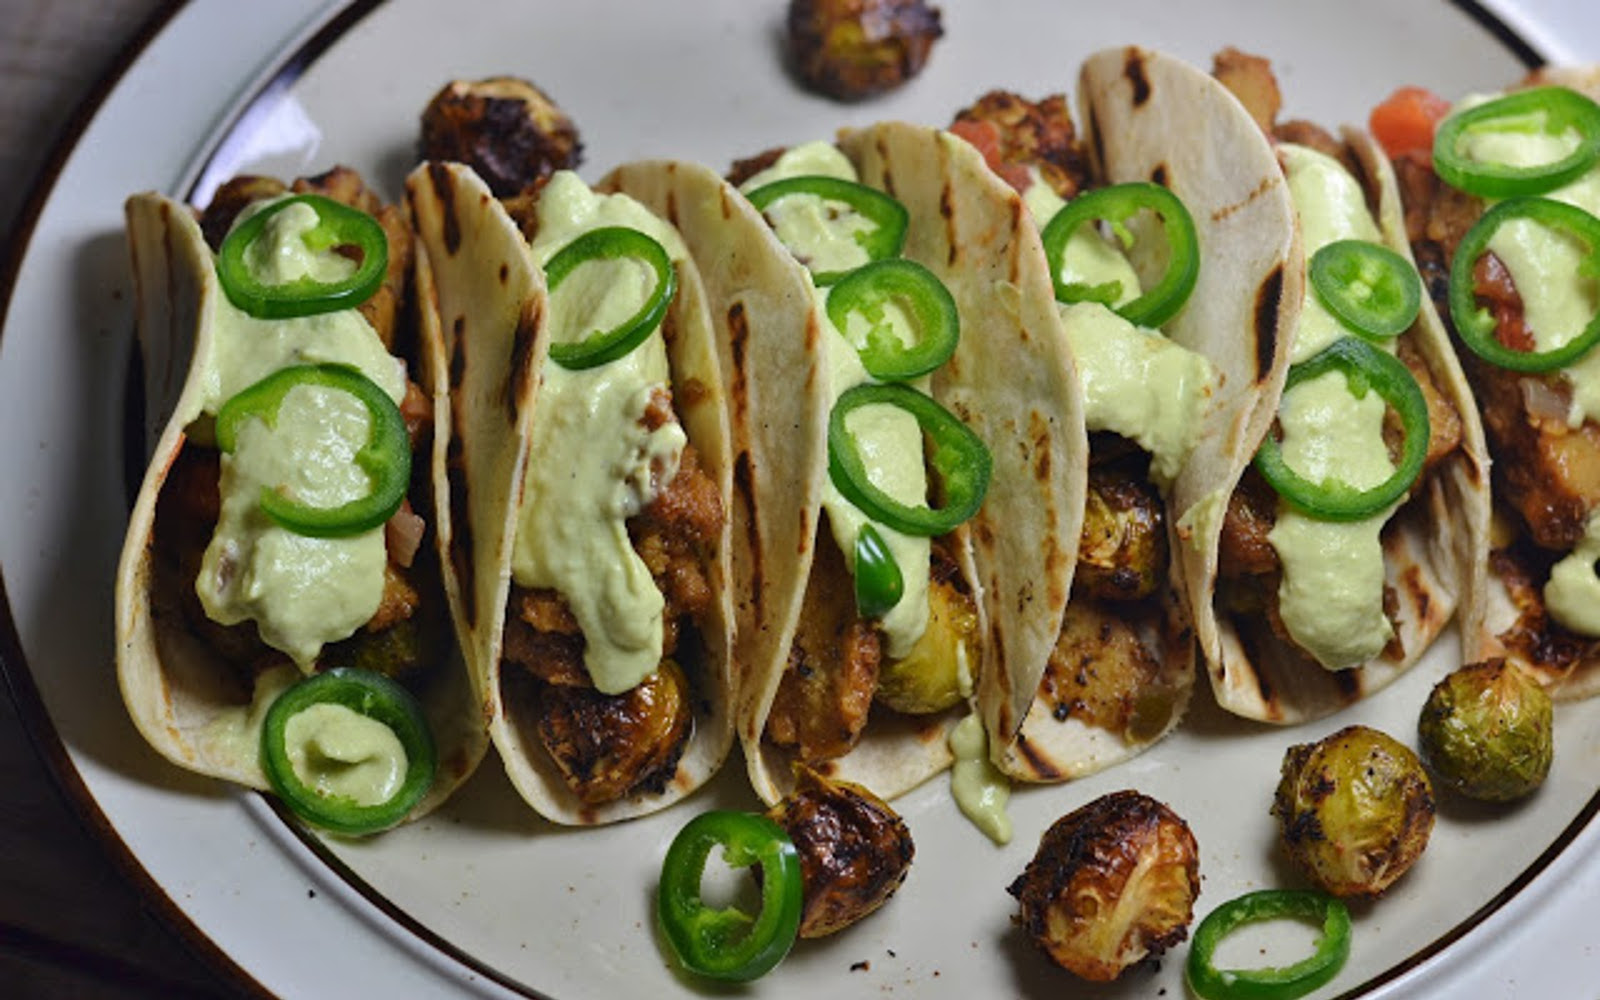 Vegan seitan tacos churrasco-style with roasted Brussels sprouts